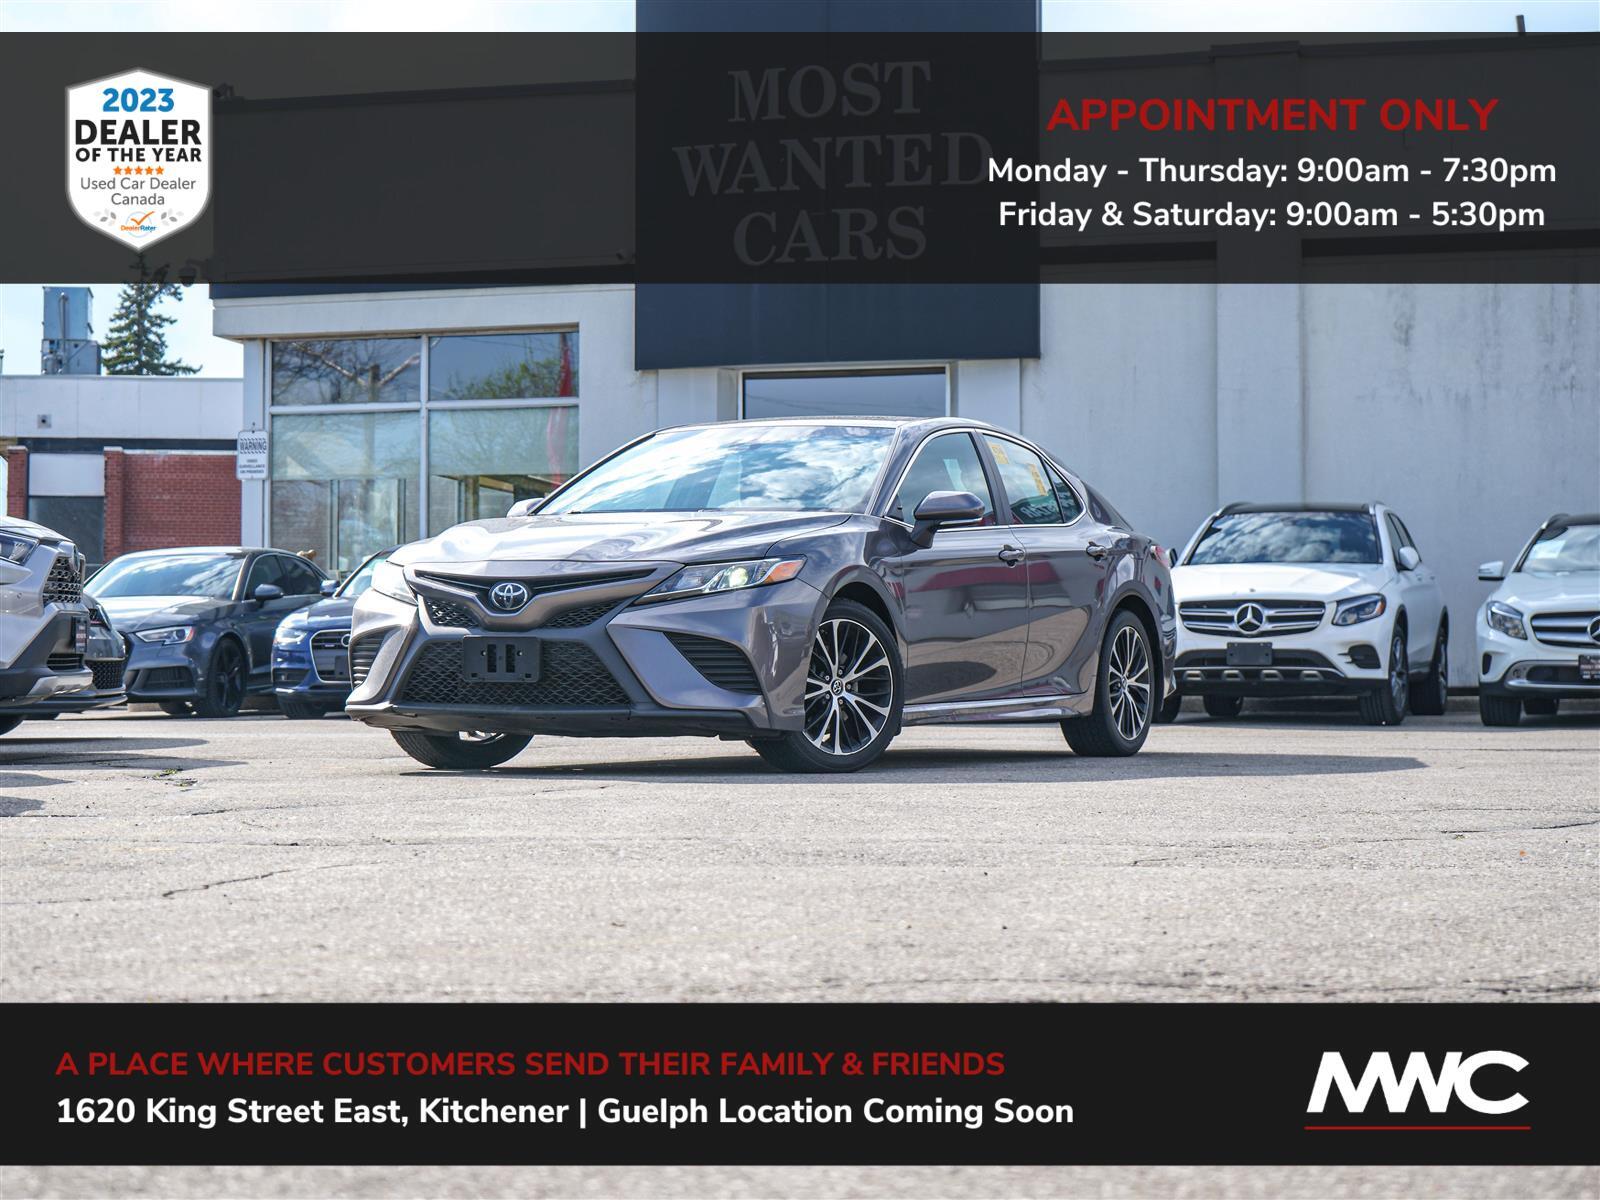 2018 Toyota Camry SE UPGRADE | IN GUELPH, BY APPT. ONLY